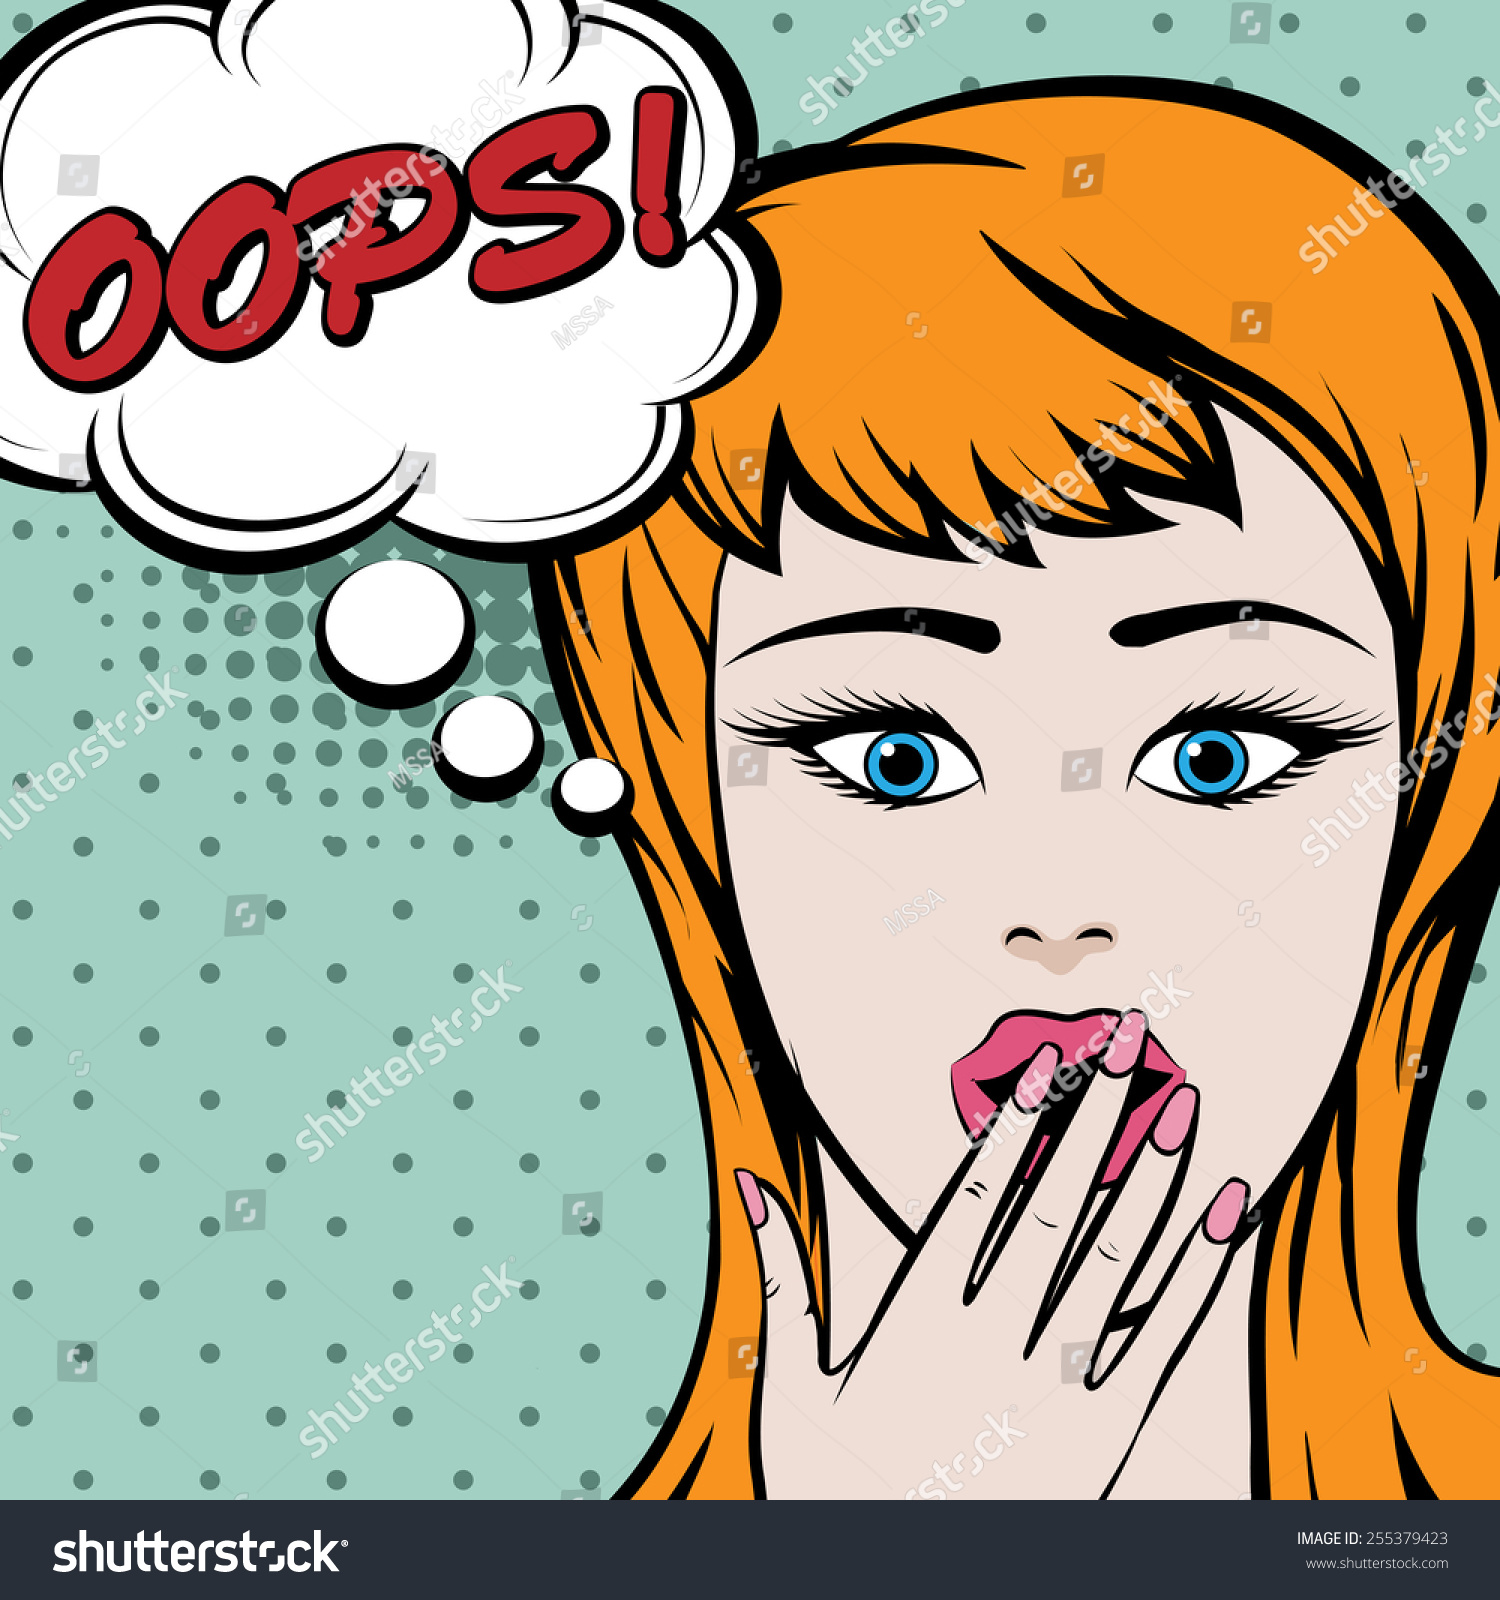 stock-vector-pop-art-cute-woman-with-oops-sign-girl-covering-her-mouth-with-her-hand-open-wonder-and-emotion-255379423.jpg